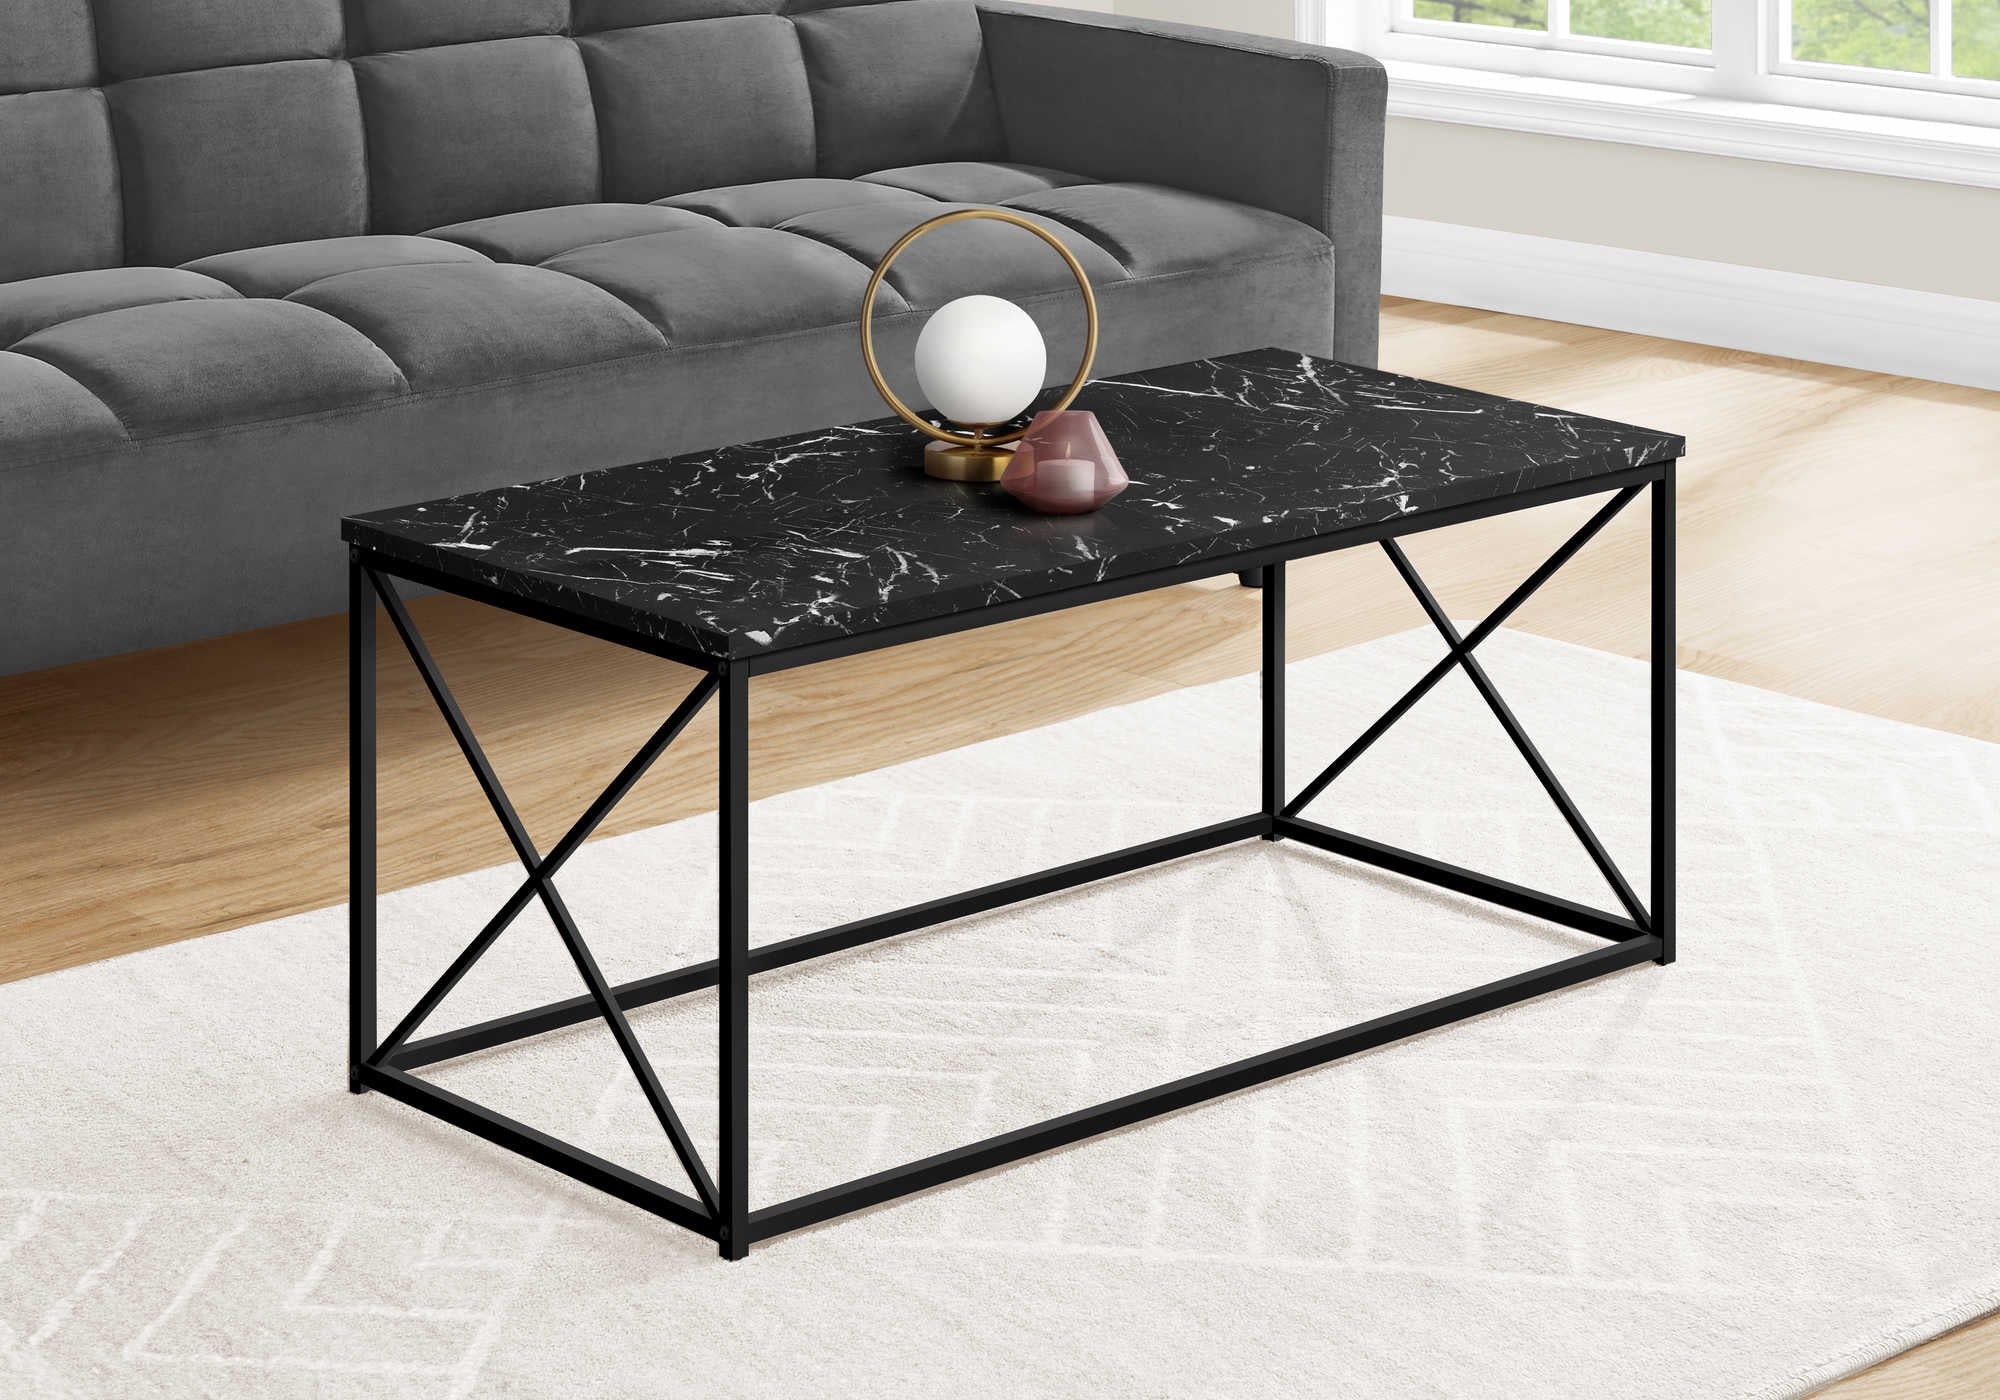 I 3783 - COFFEE TABLE - 40"L / BLACK MARBLE / BLACK METAL BY MONARCH SPECIALTIES INC